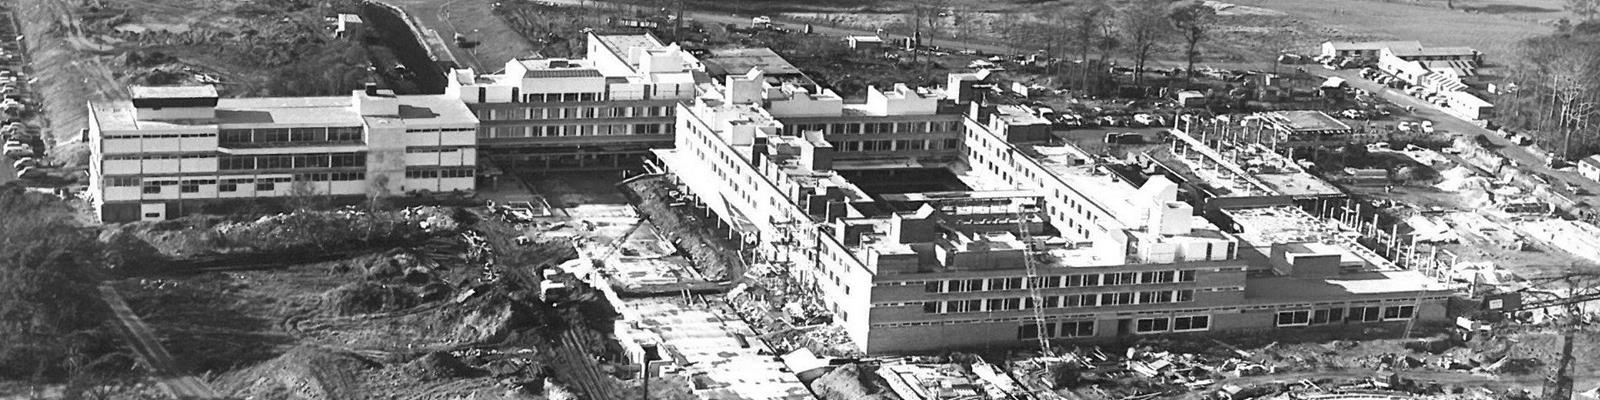 A black and white photograph of Lancaster University under construction